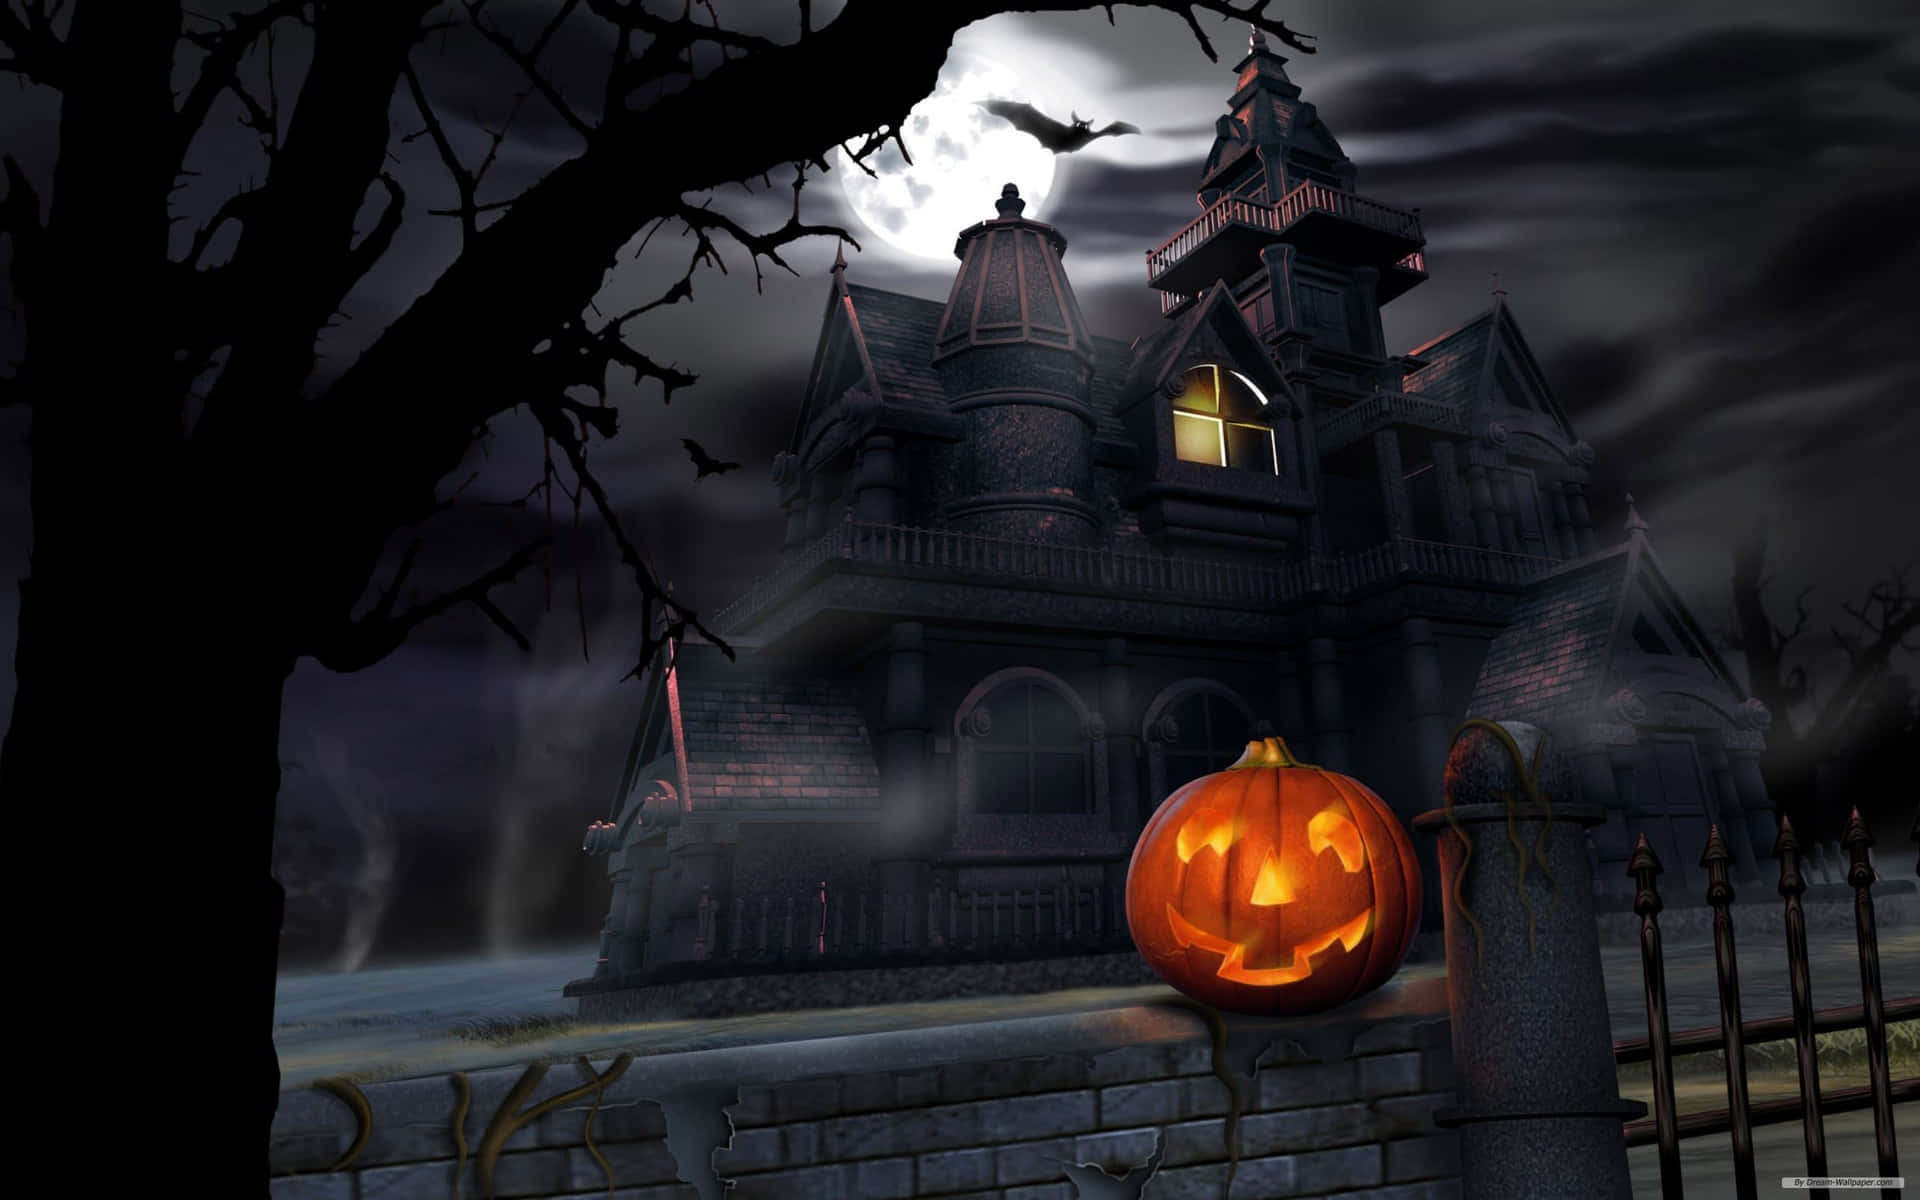 Trick or treat yourself to a Halloween-themed Macbook this year! Wallpaper